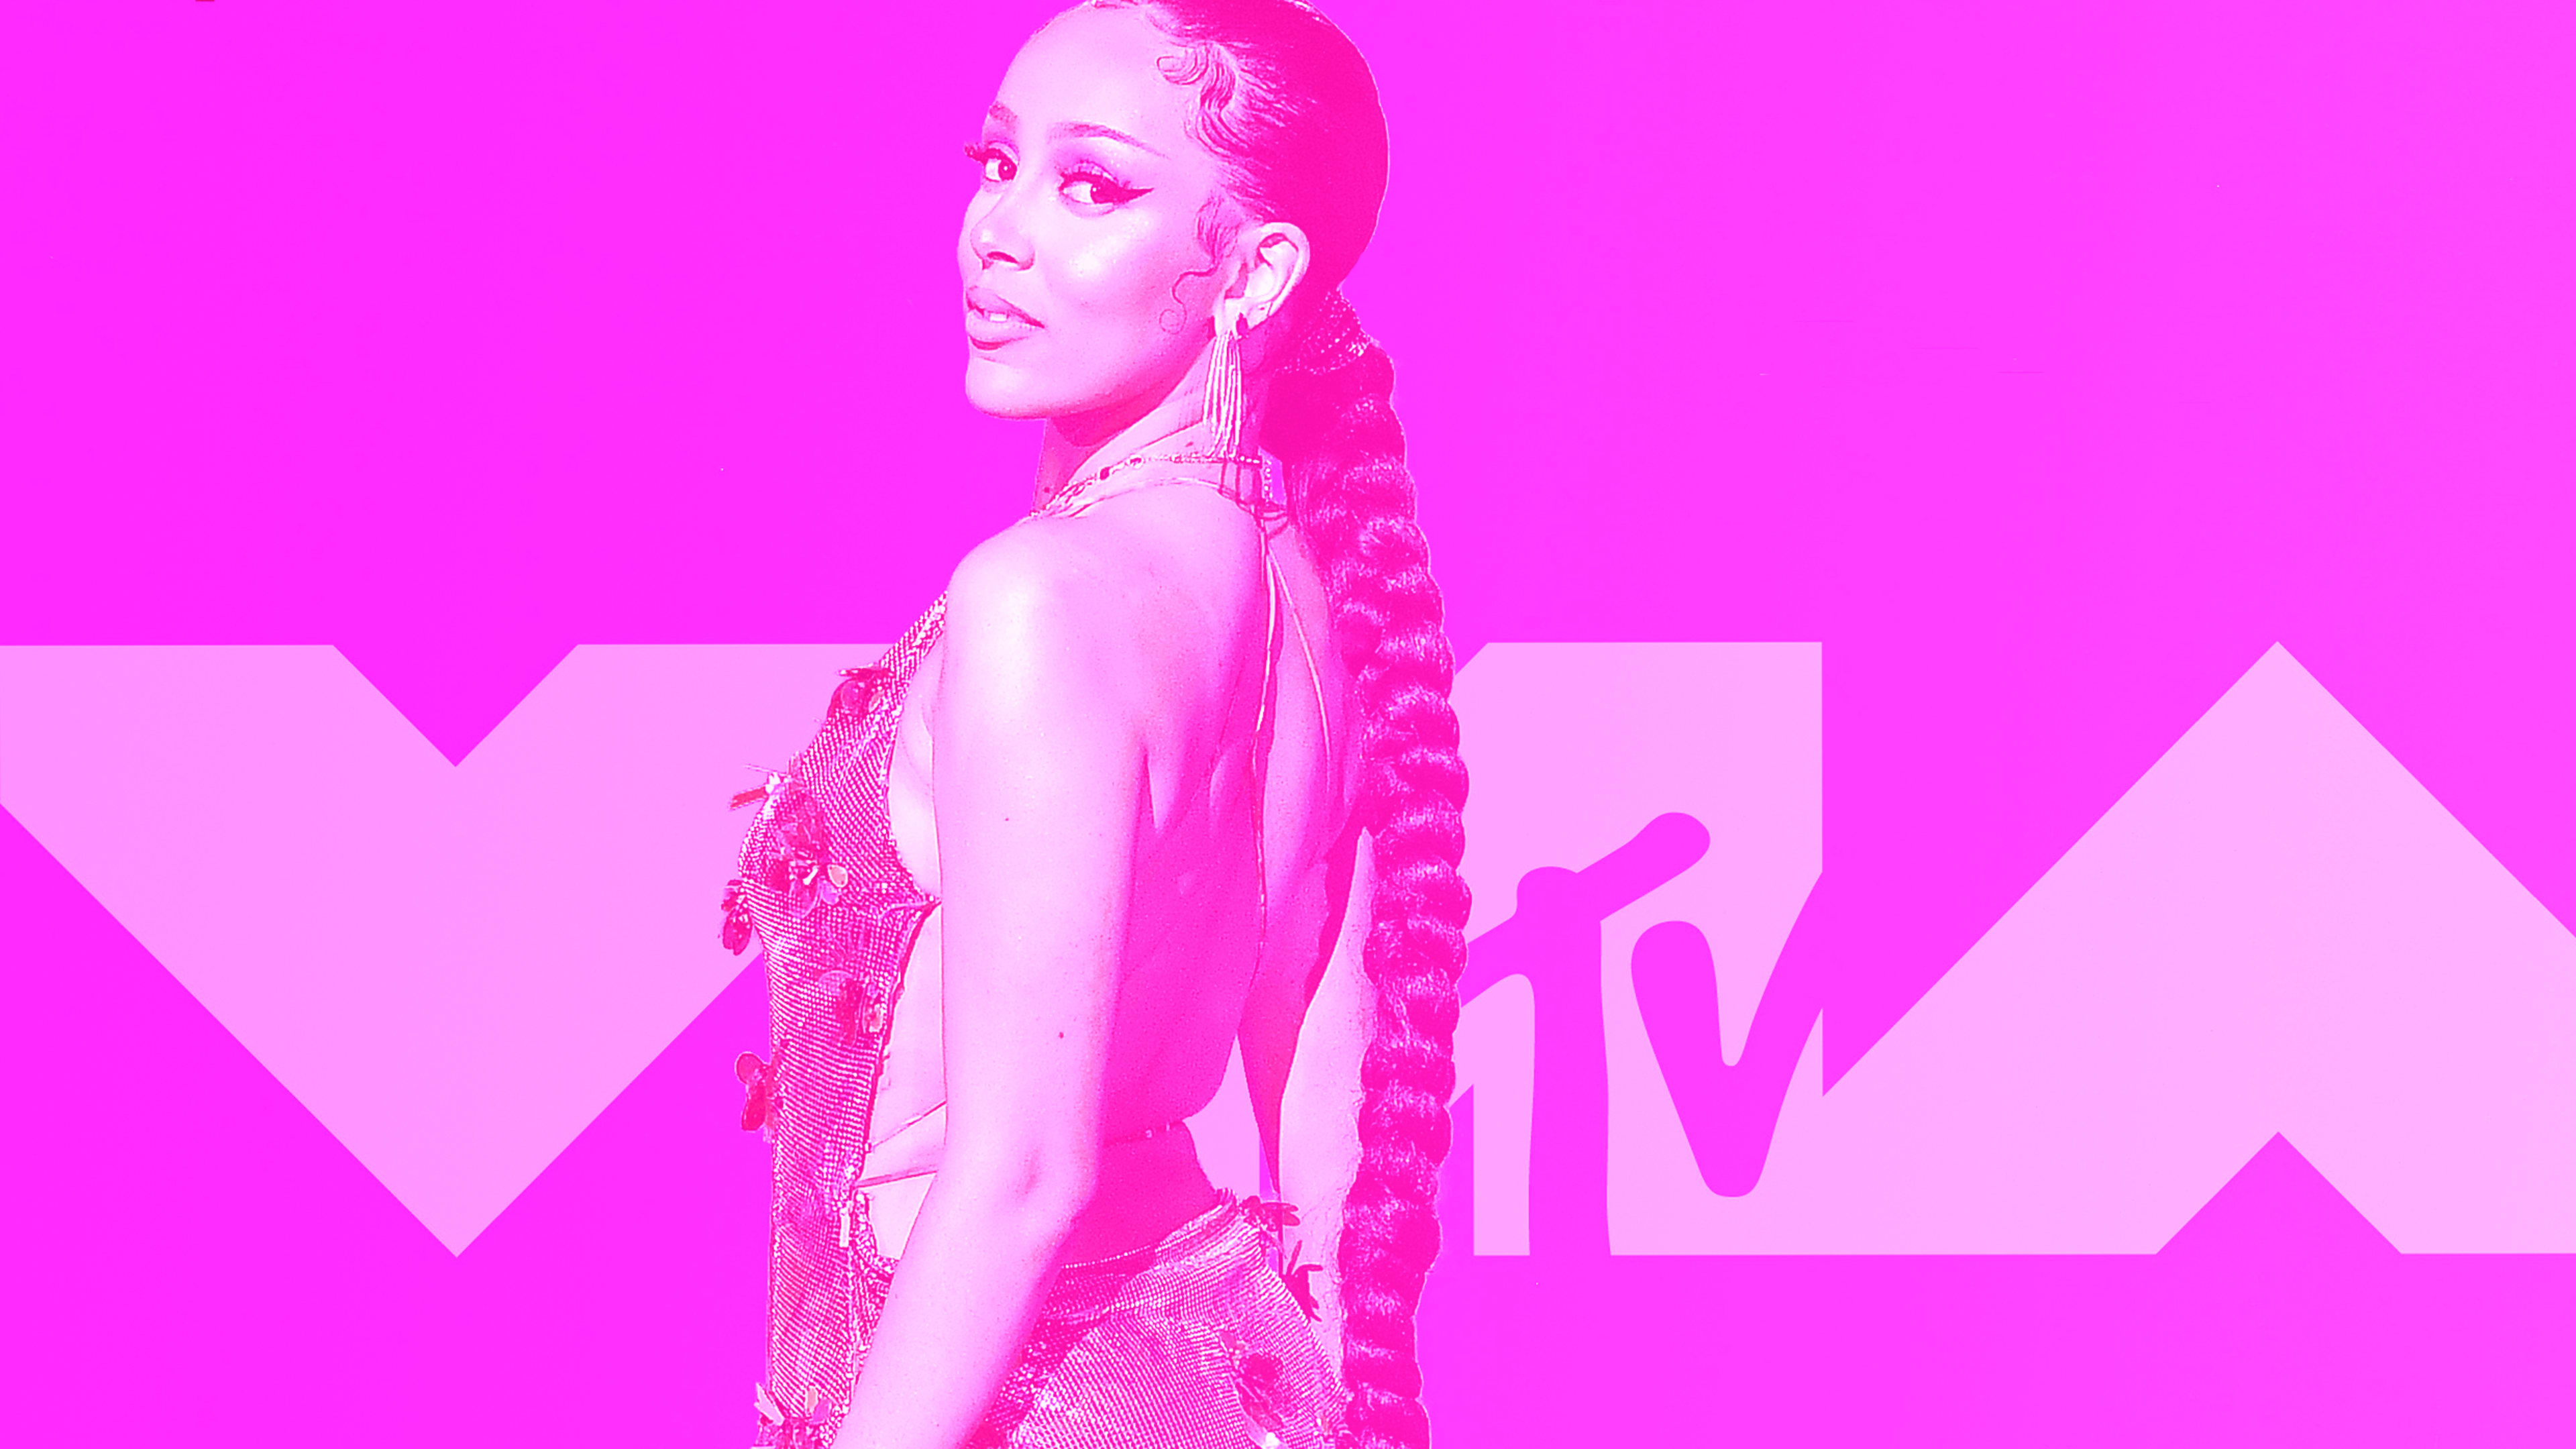 VMAs 2021: How to watch the MTV Video Music Awards live without cable